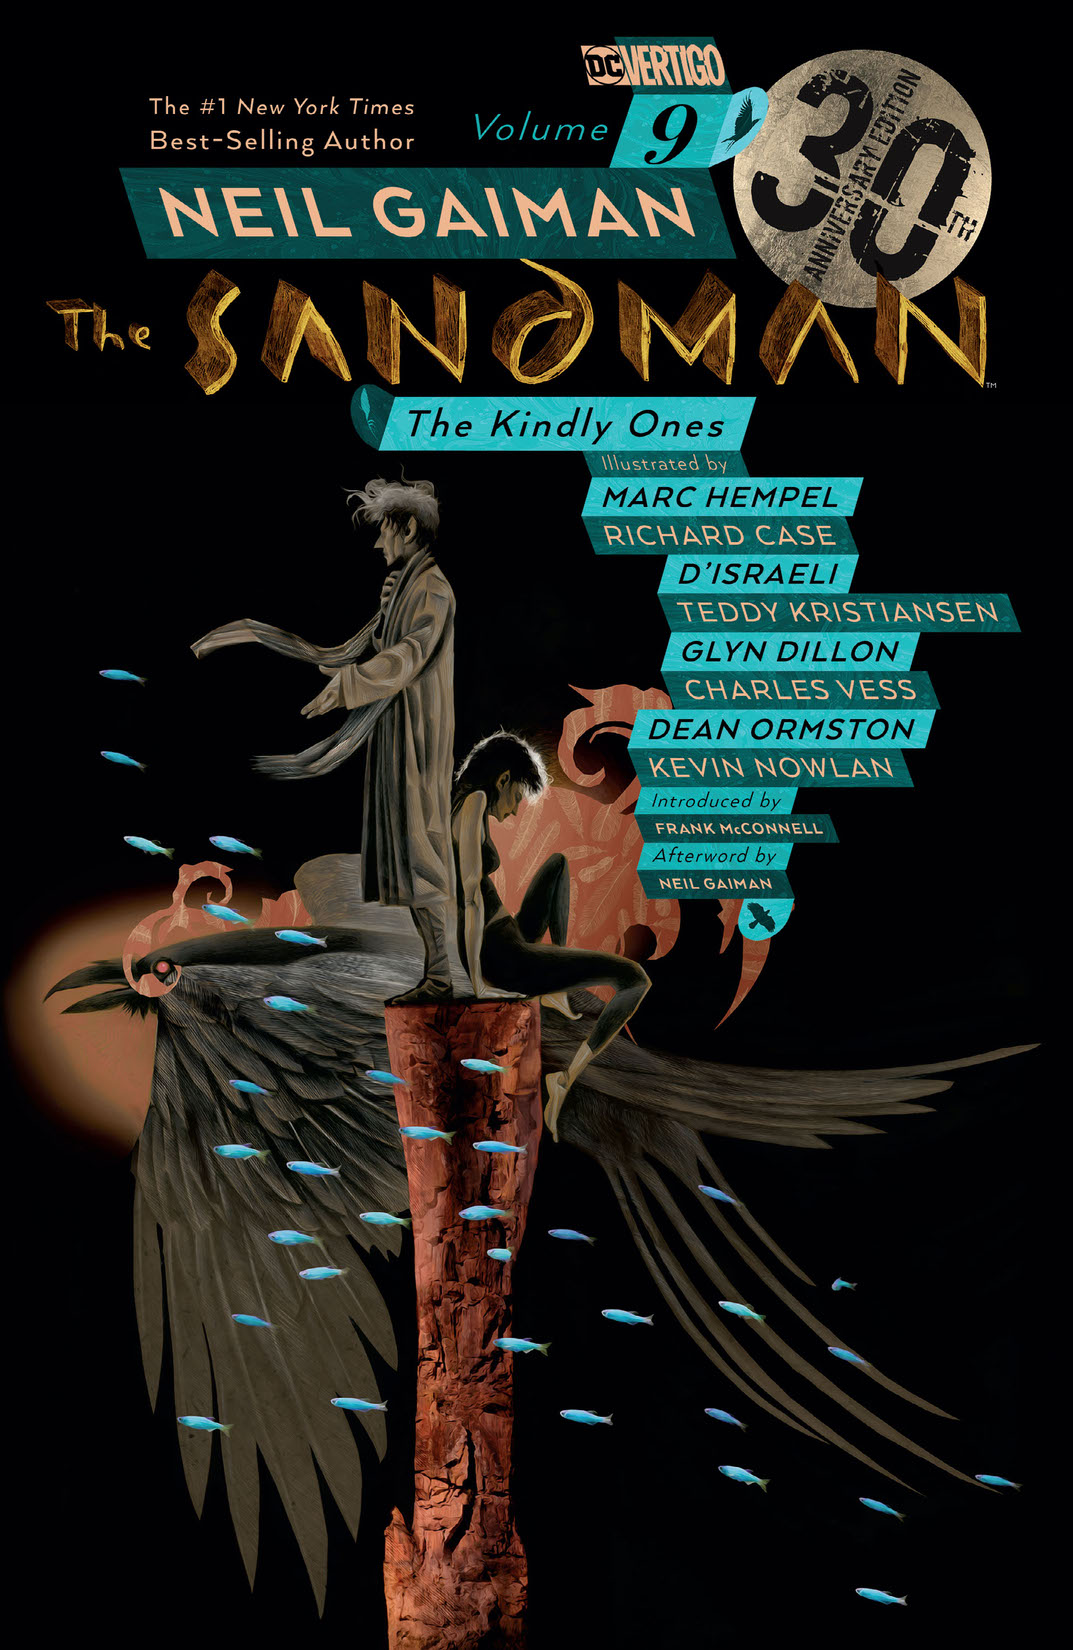 Sandman Vol. 9: The Kindly Ones 30th Anniversary Edition preview images